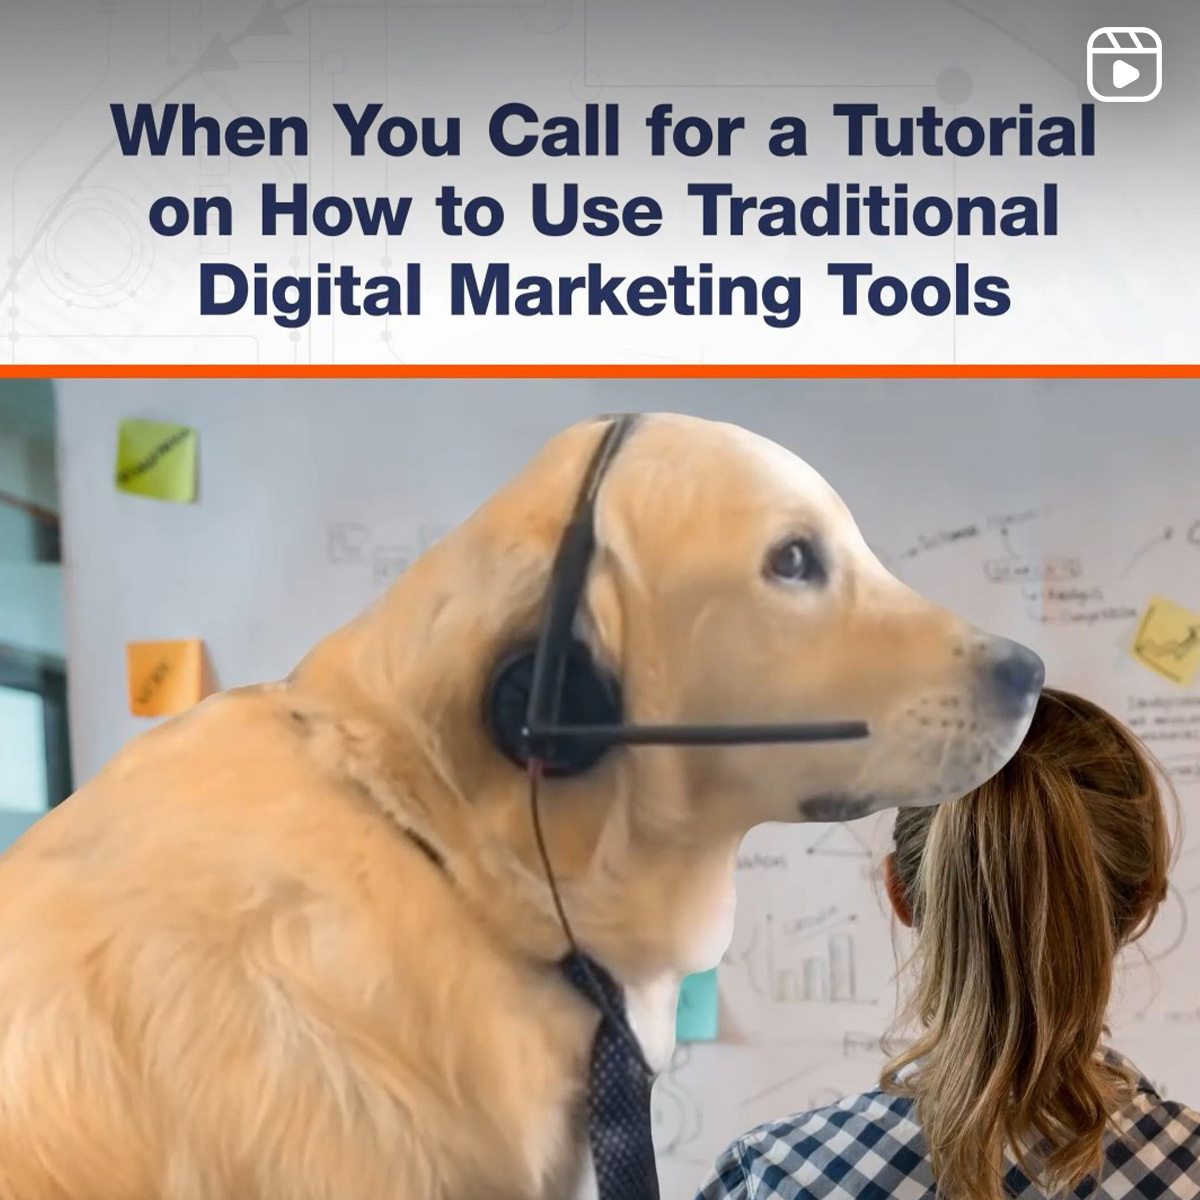 When You Call for a Tutorial on How to Use Traditional Digital Marketing Tools